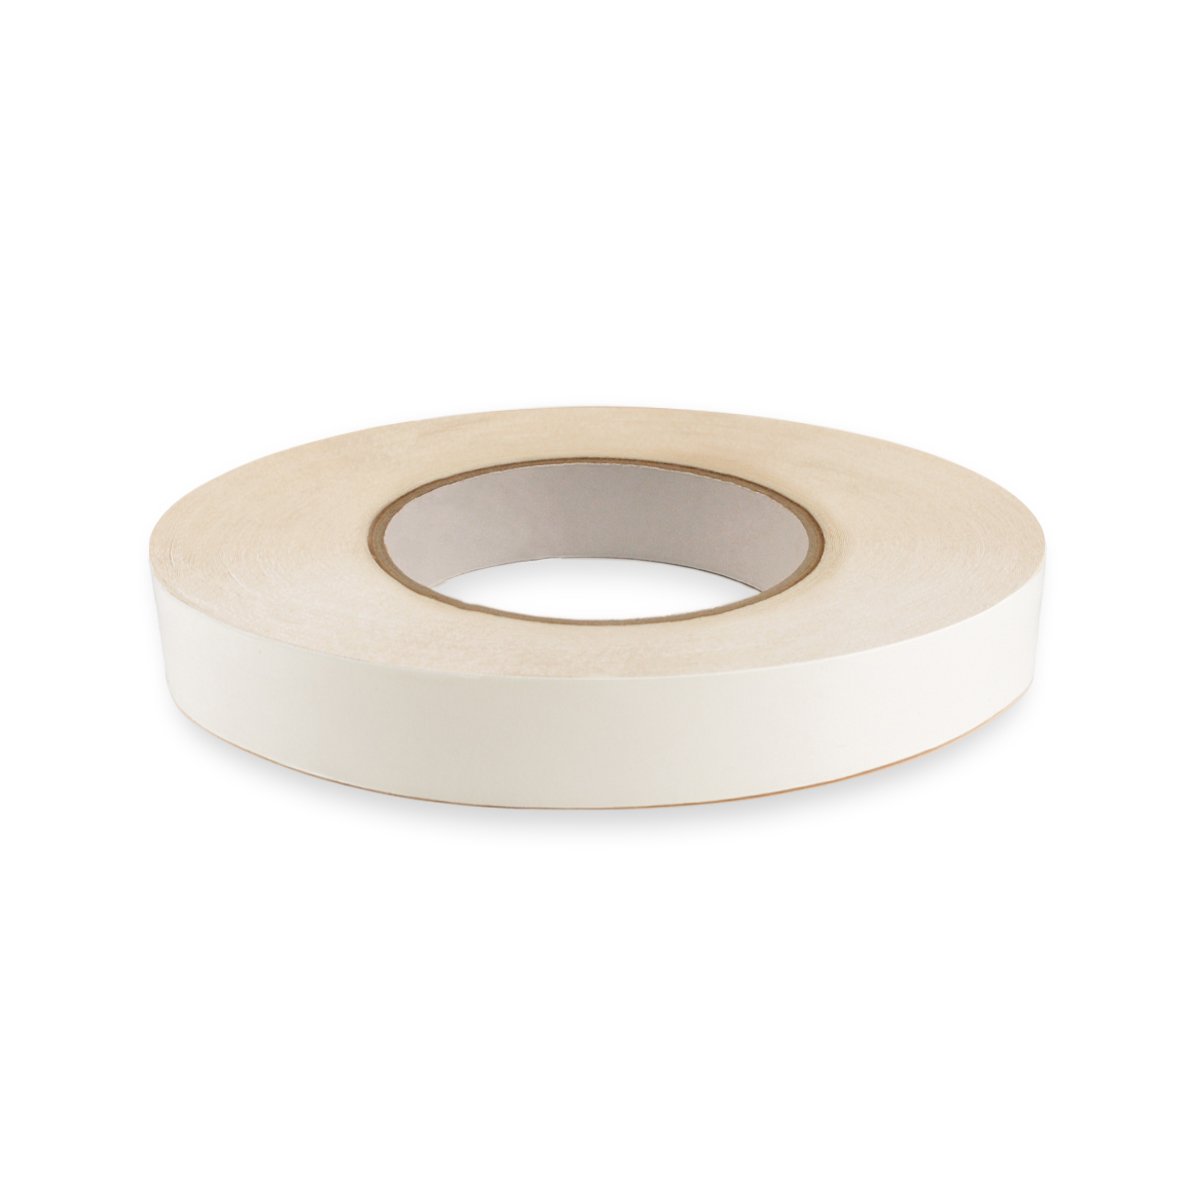 WAWAK 1/4 Double-Sided Leather Basting Tape - 60 yds. - Clear